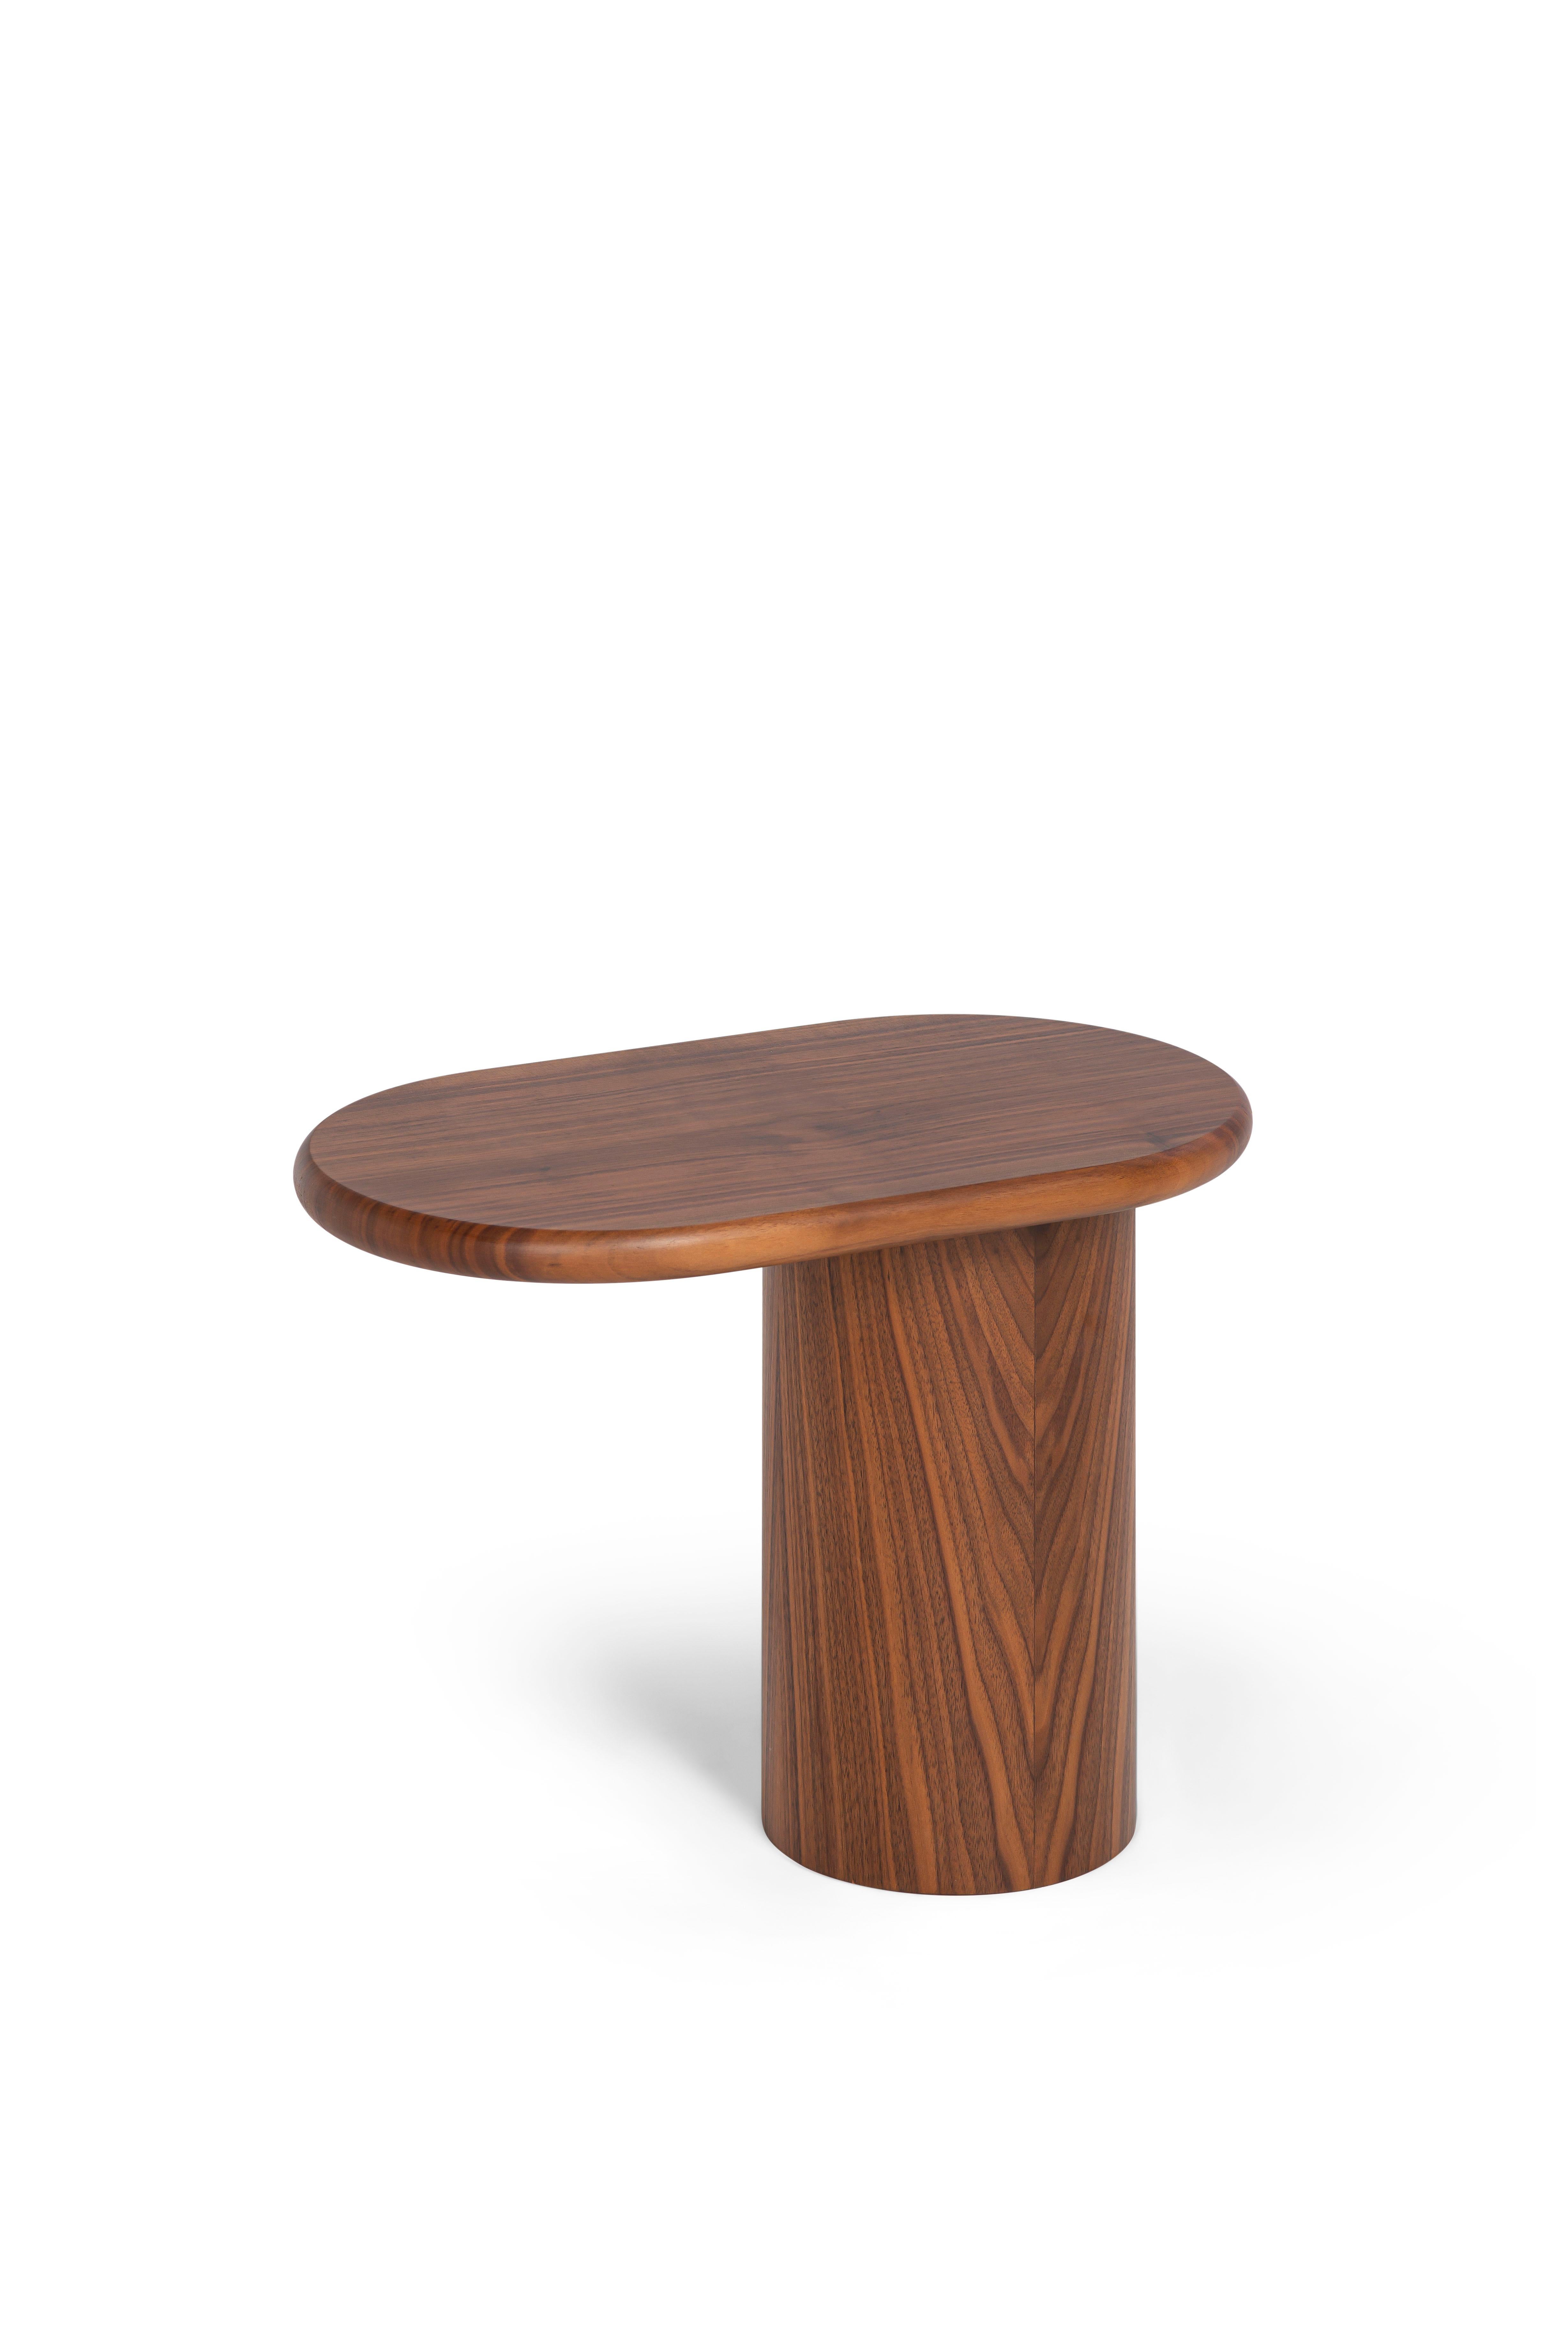 21st Century Matteo Zorzenoni Cantilever S Side Coffee Table Wood Green Scapin For Sale 1